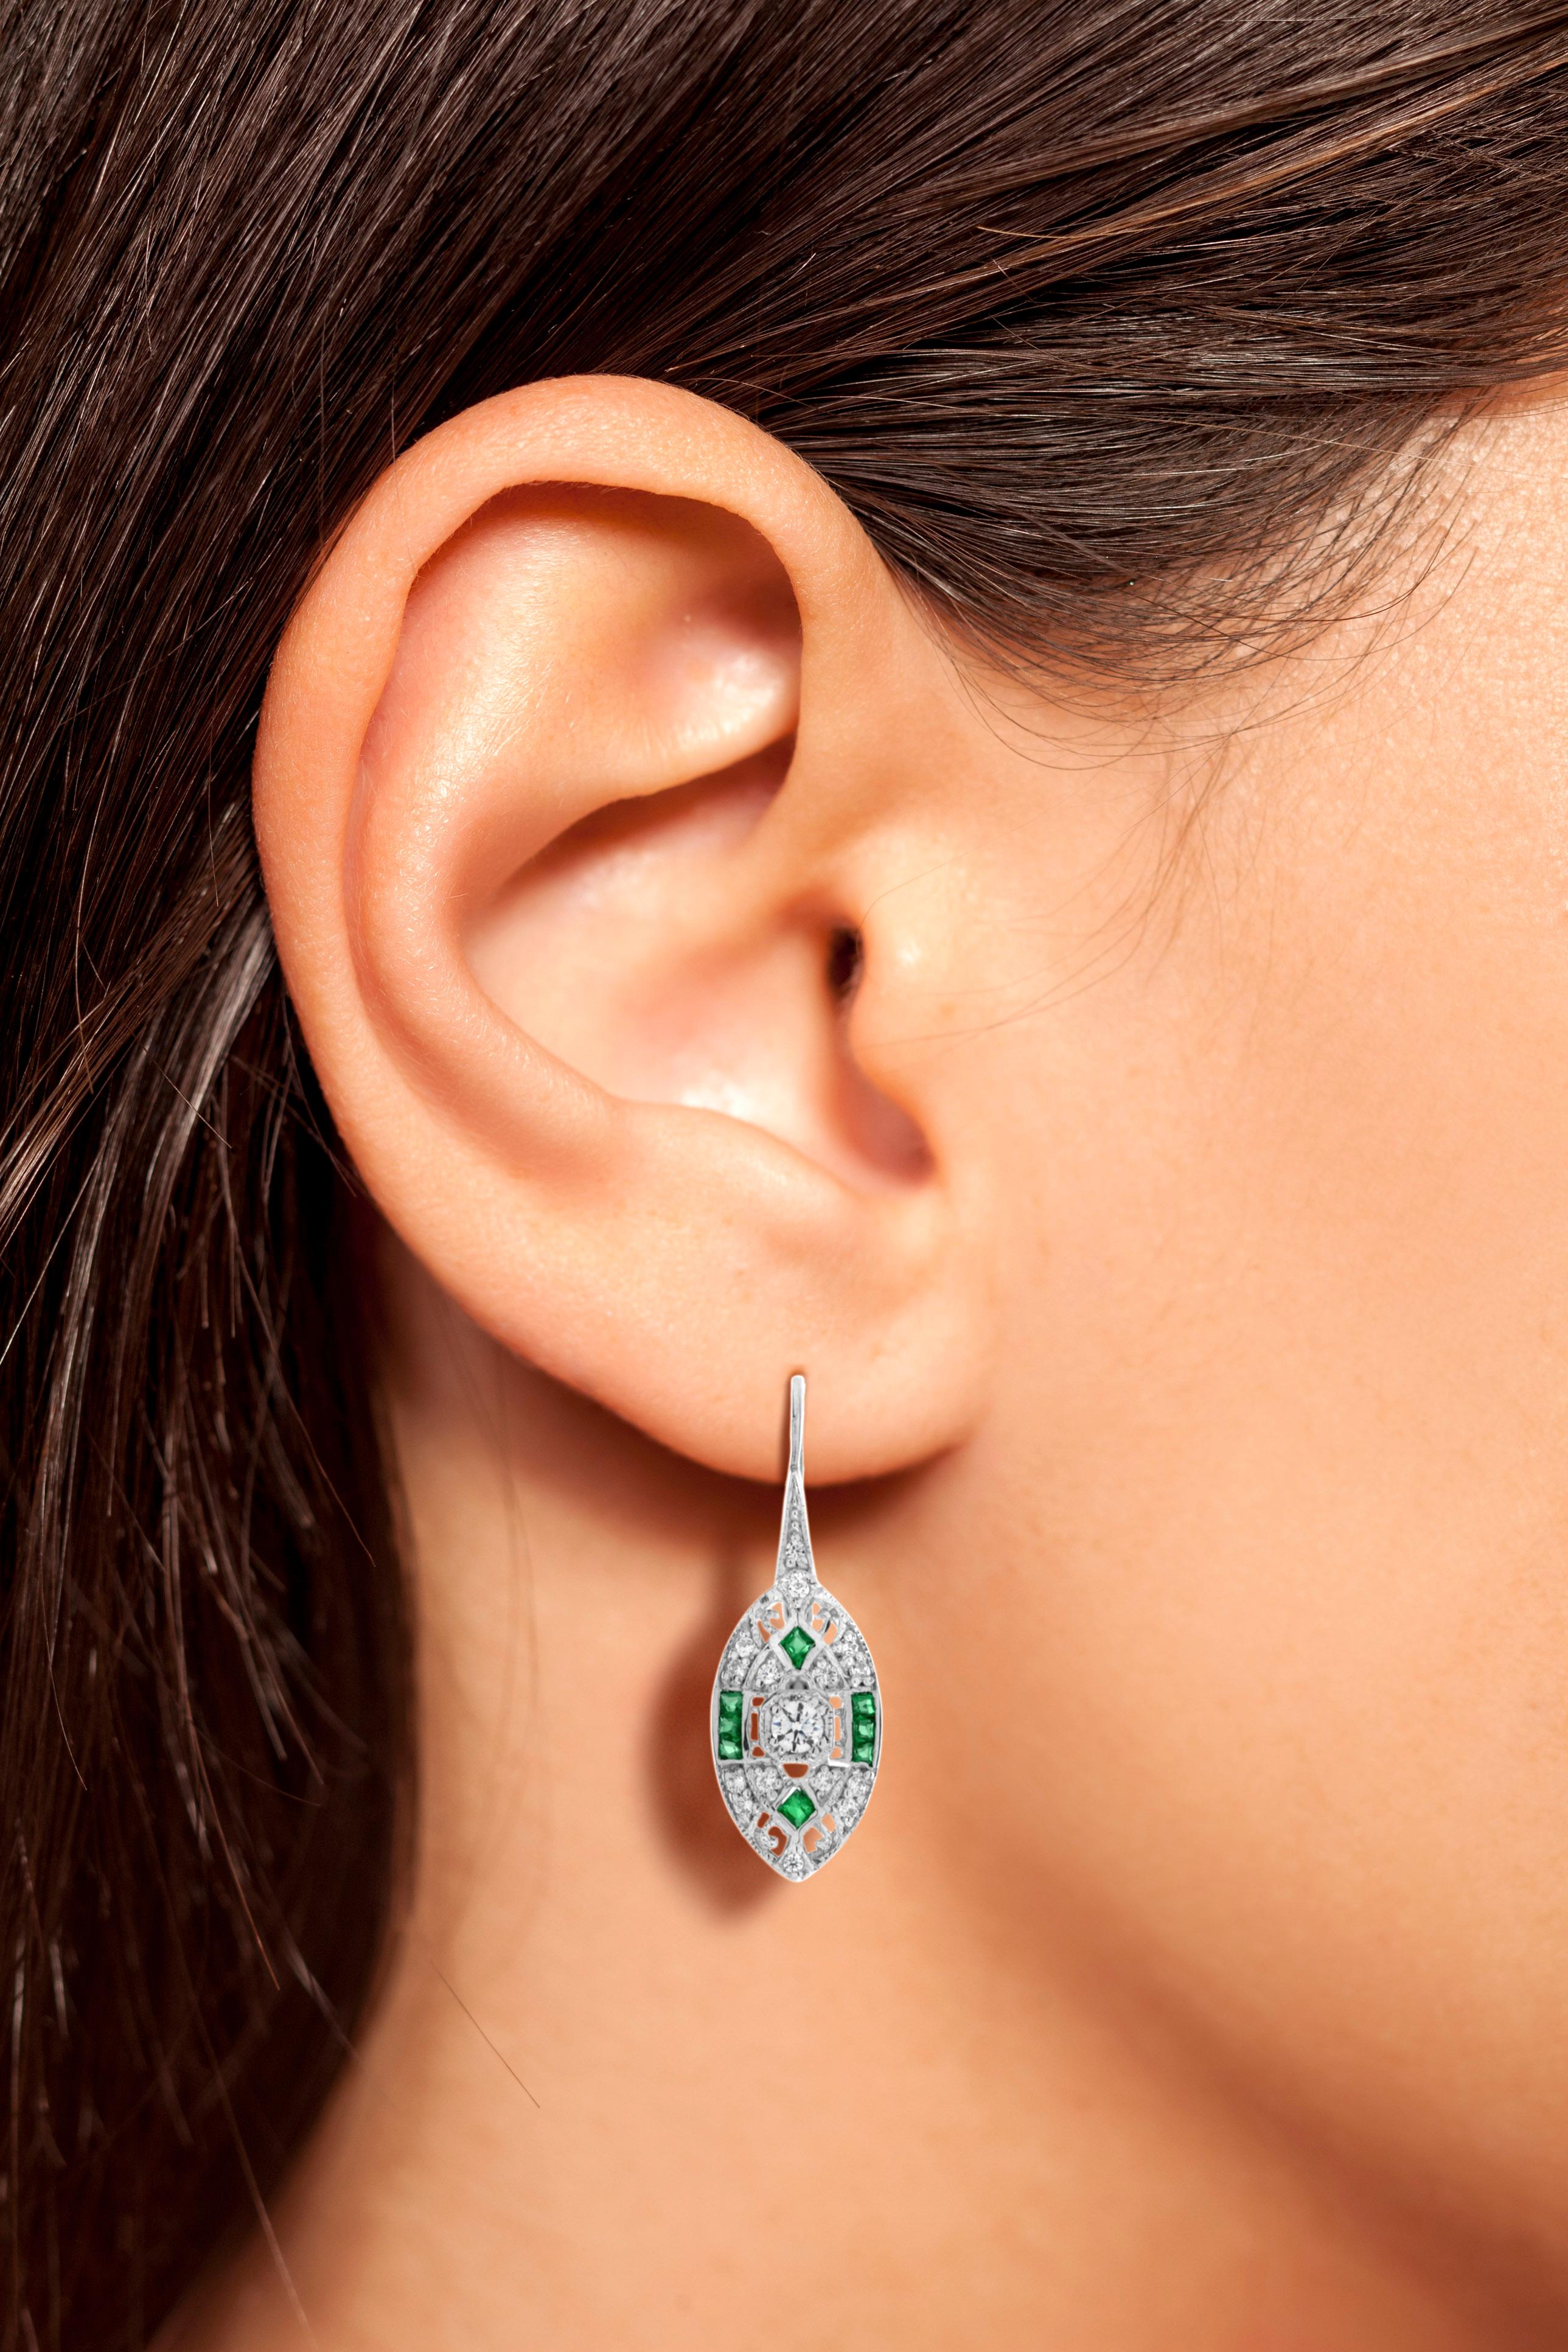 A pair of Art Deco style emerald and diamond lever back earrings, set with French cut emeralds and round cut diamonds. Mounted in 14k white gold.

Information
Metal: 14K White Gold
Width: 8 mm.
Length: 25 mm.
Weight: 3.80 g. (approx. total